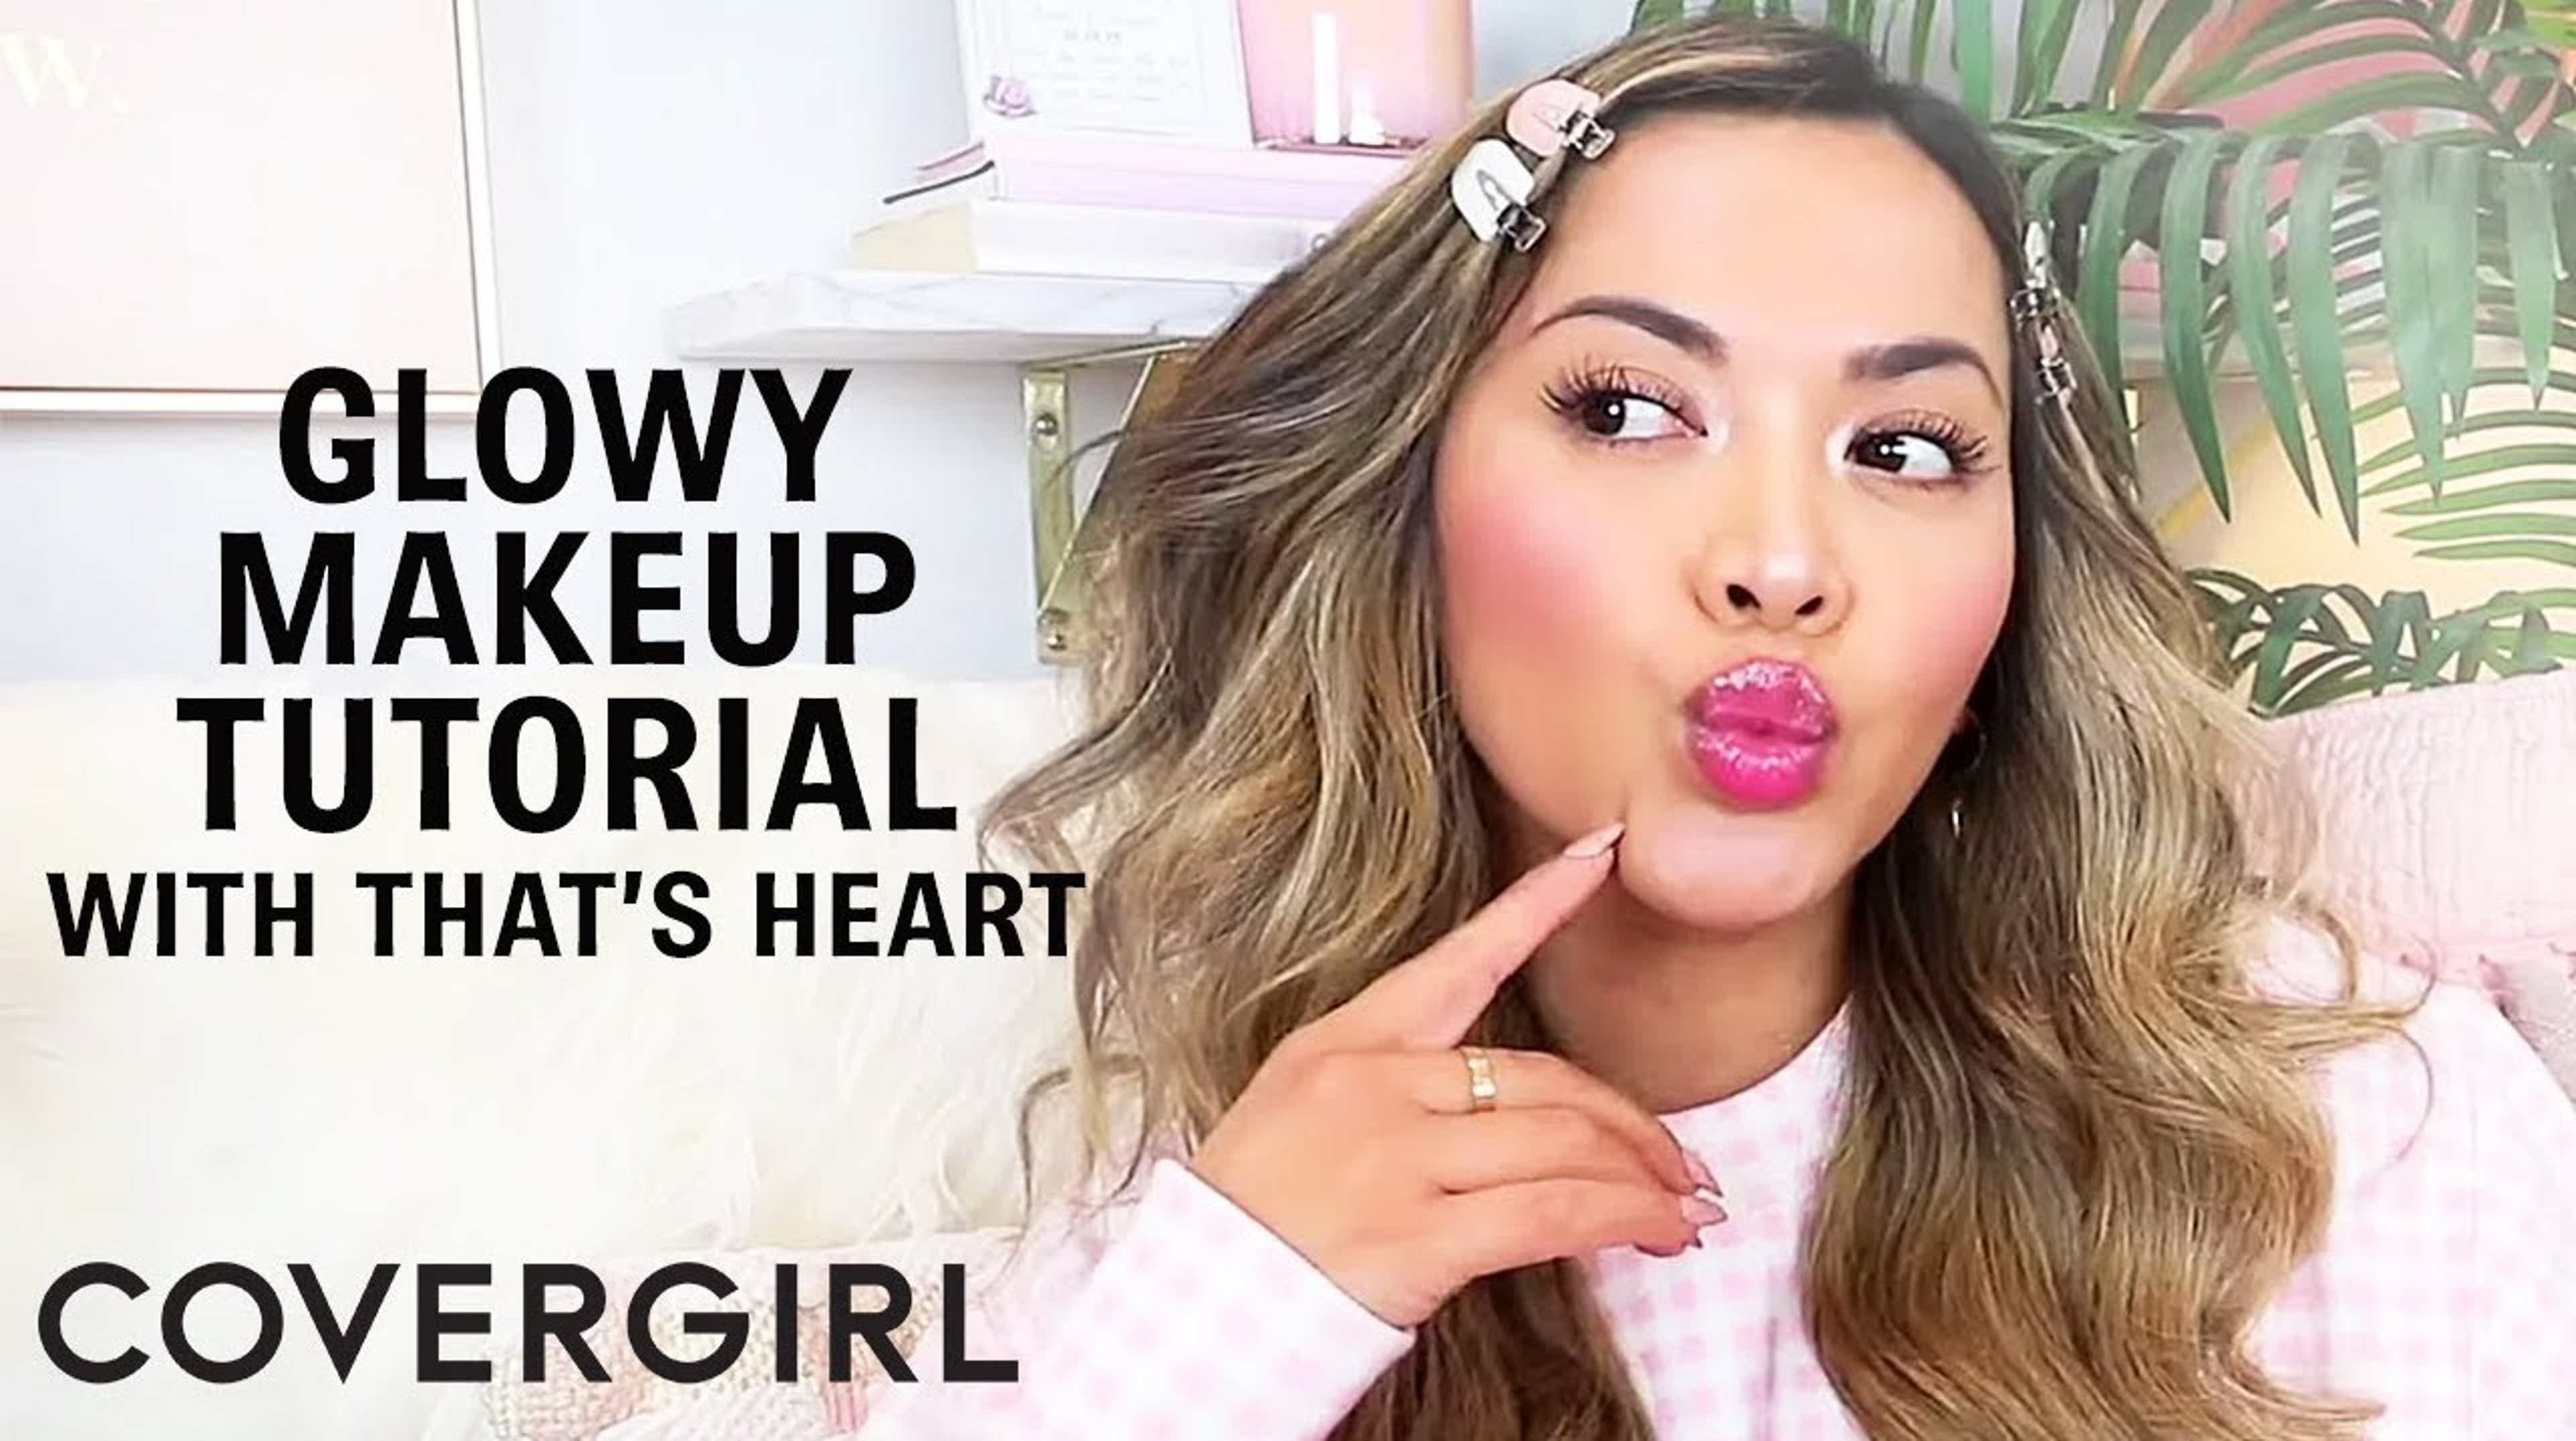 Glowy "No Makeup" Makeup Tutorial with That's Heart 